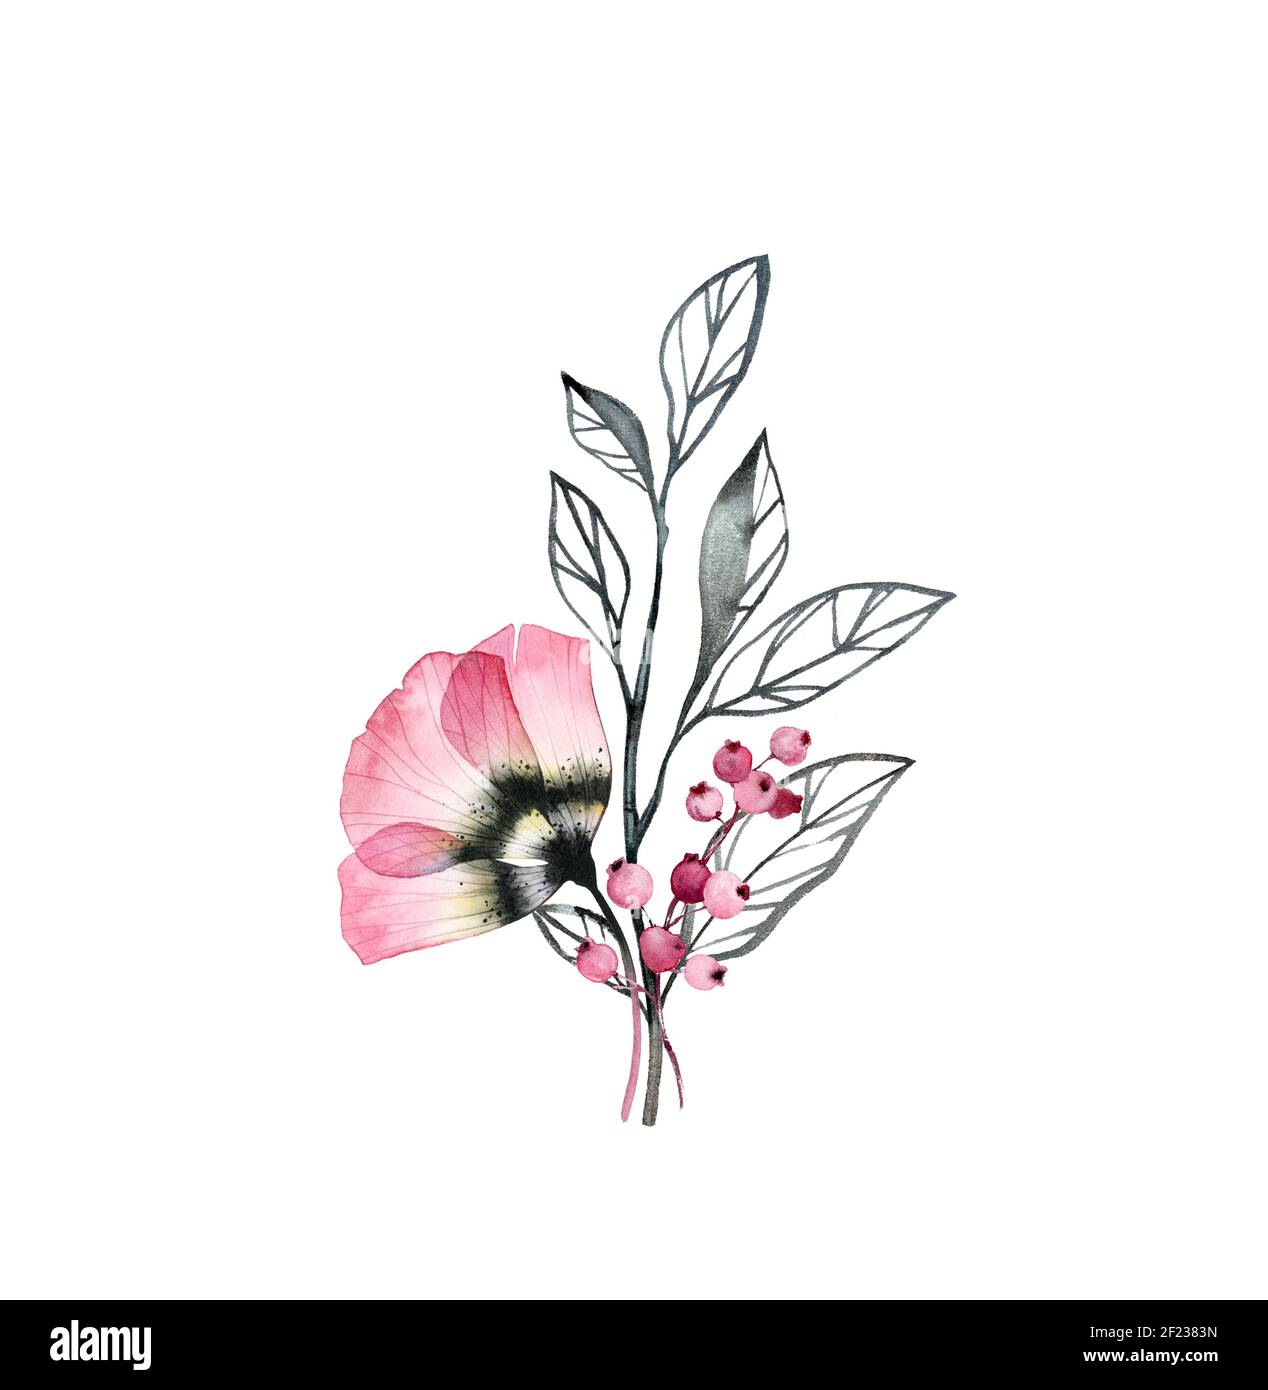 Watercolor anemone bouquet. Rose pink flower with leaves and red berries isolated on white. Hand painted ink floral artwork with detailed petals Stock Photo